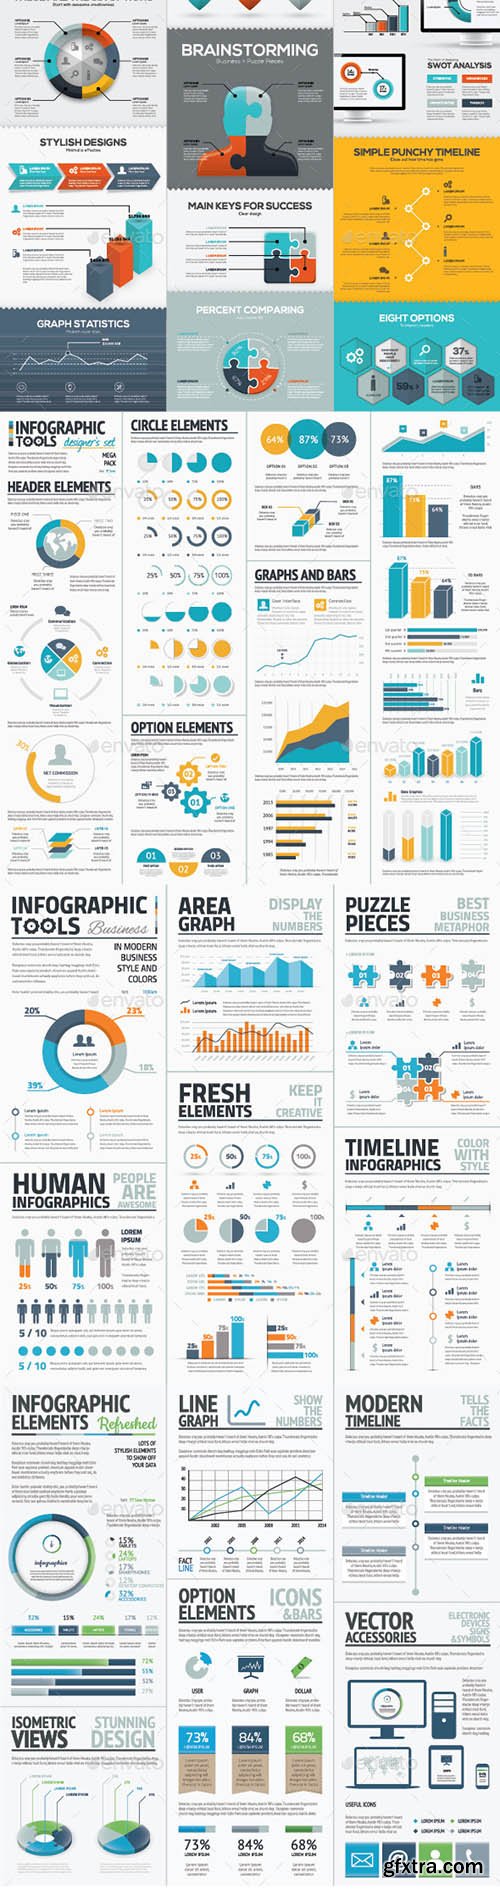 GraphicRiver The Big Pack of Infographic Templates Save 41%! 8994488